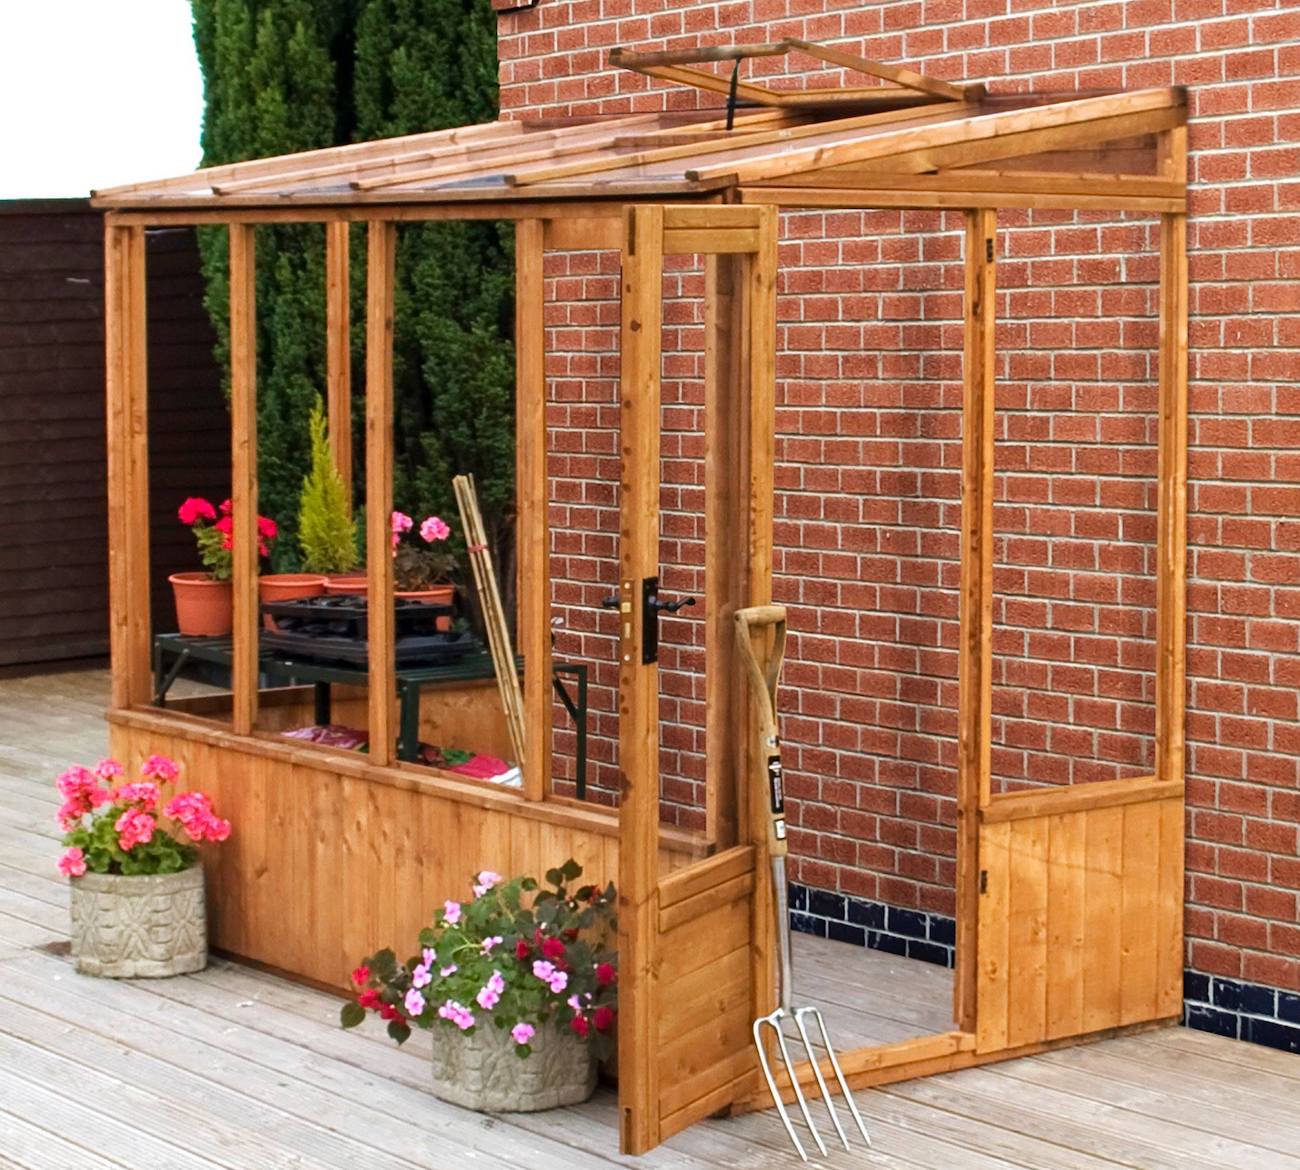 8 x 4 Evesham Pent Wooden Greenhouse from Waltons